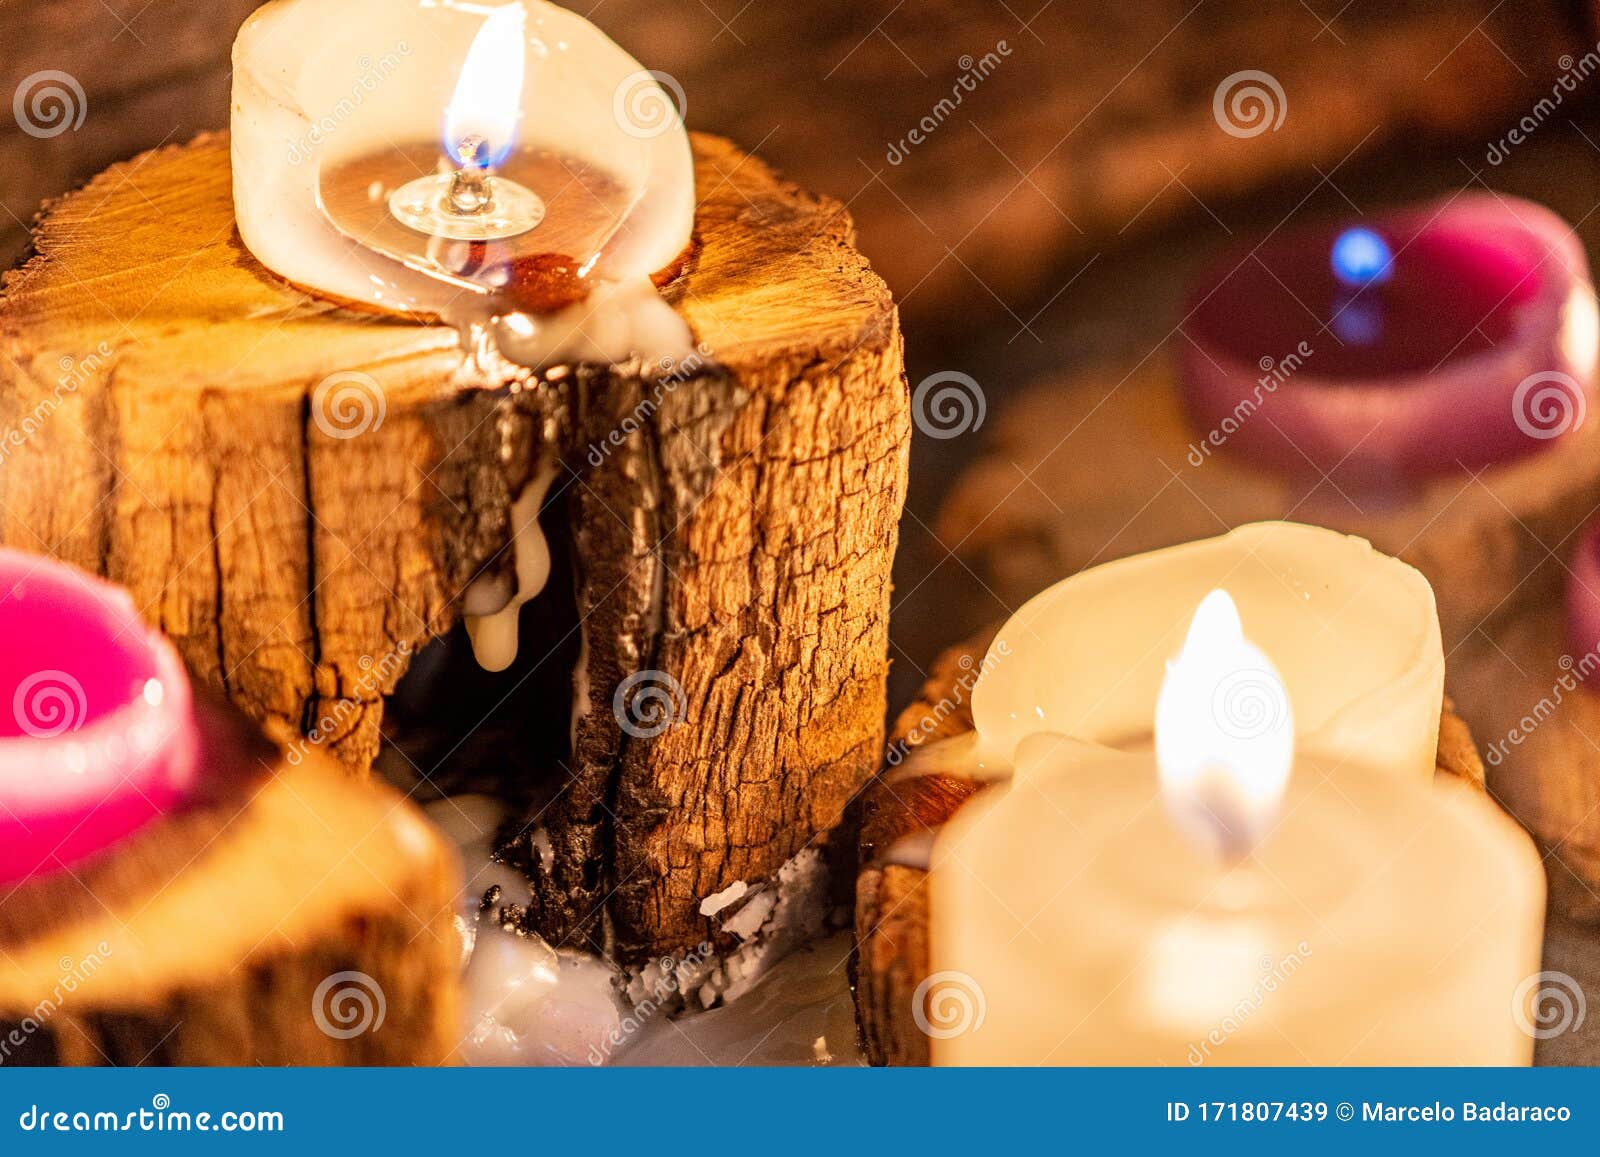 lighted candles with ornate wood and scented and energetic incense